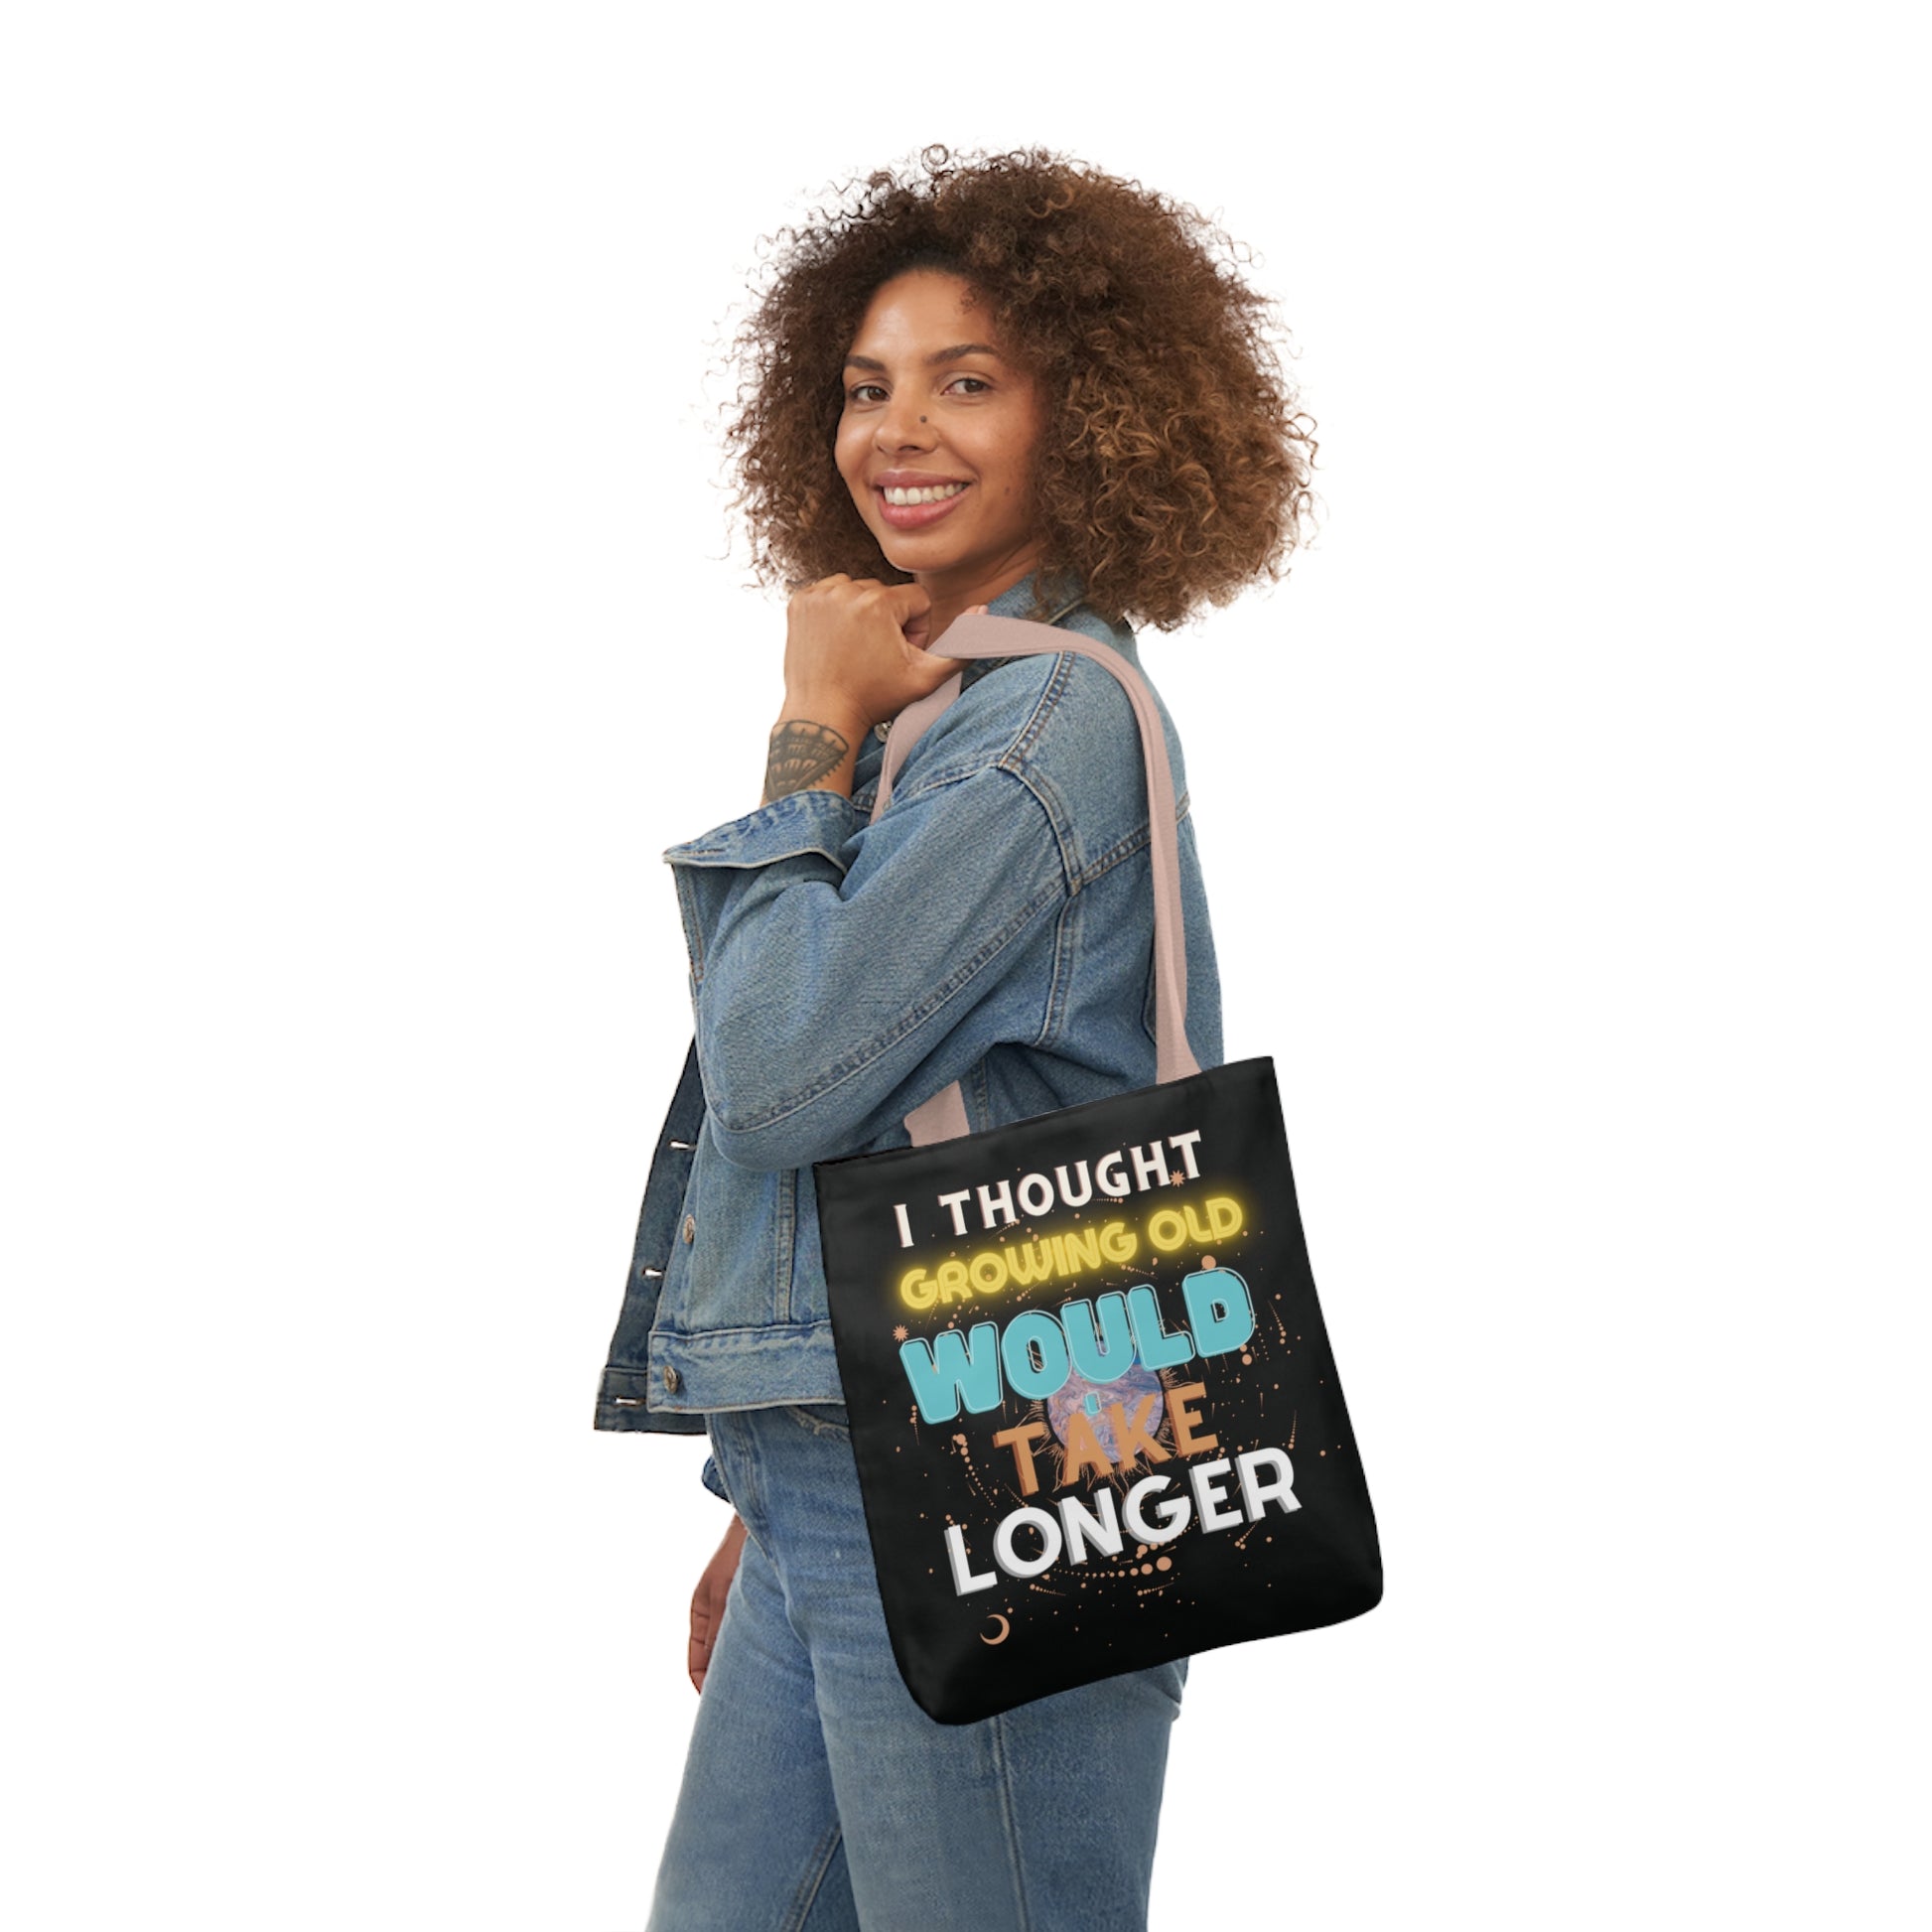 I Thought Growing Old Would Take Longer Tote Bag - Adulting Tote Bag - Growing Old Tote Accessories   